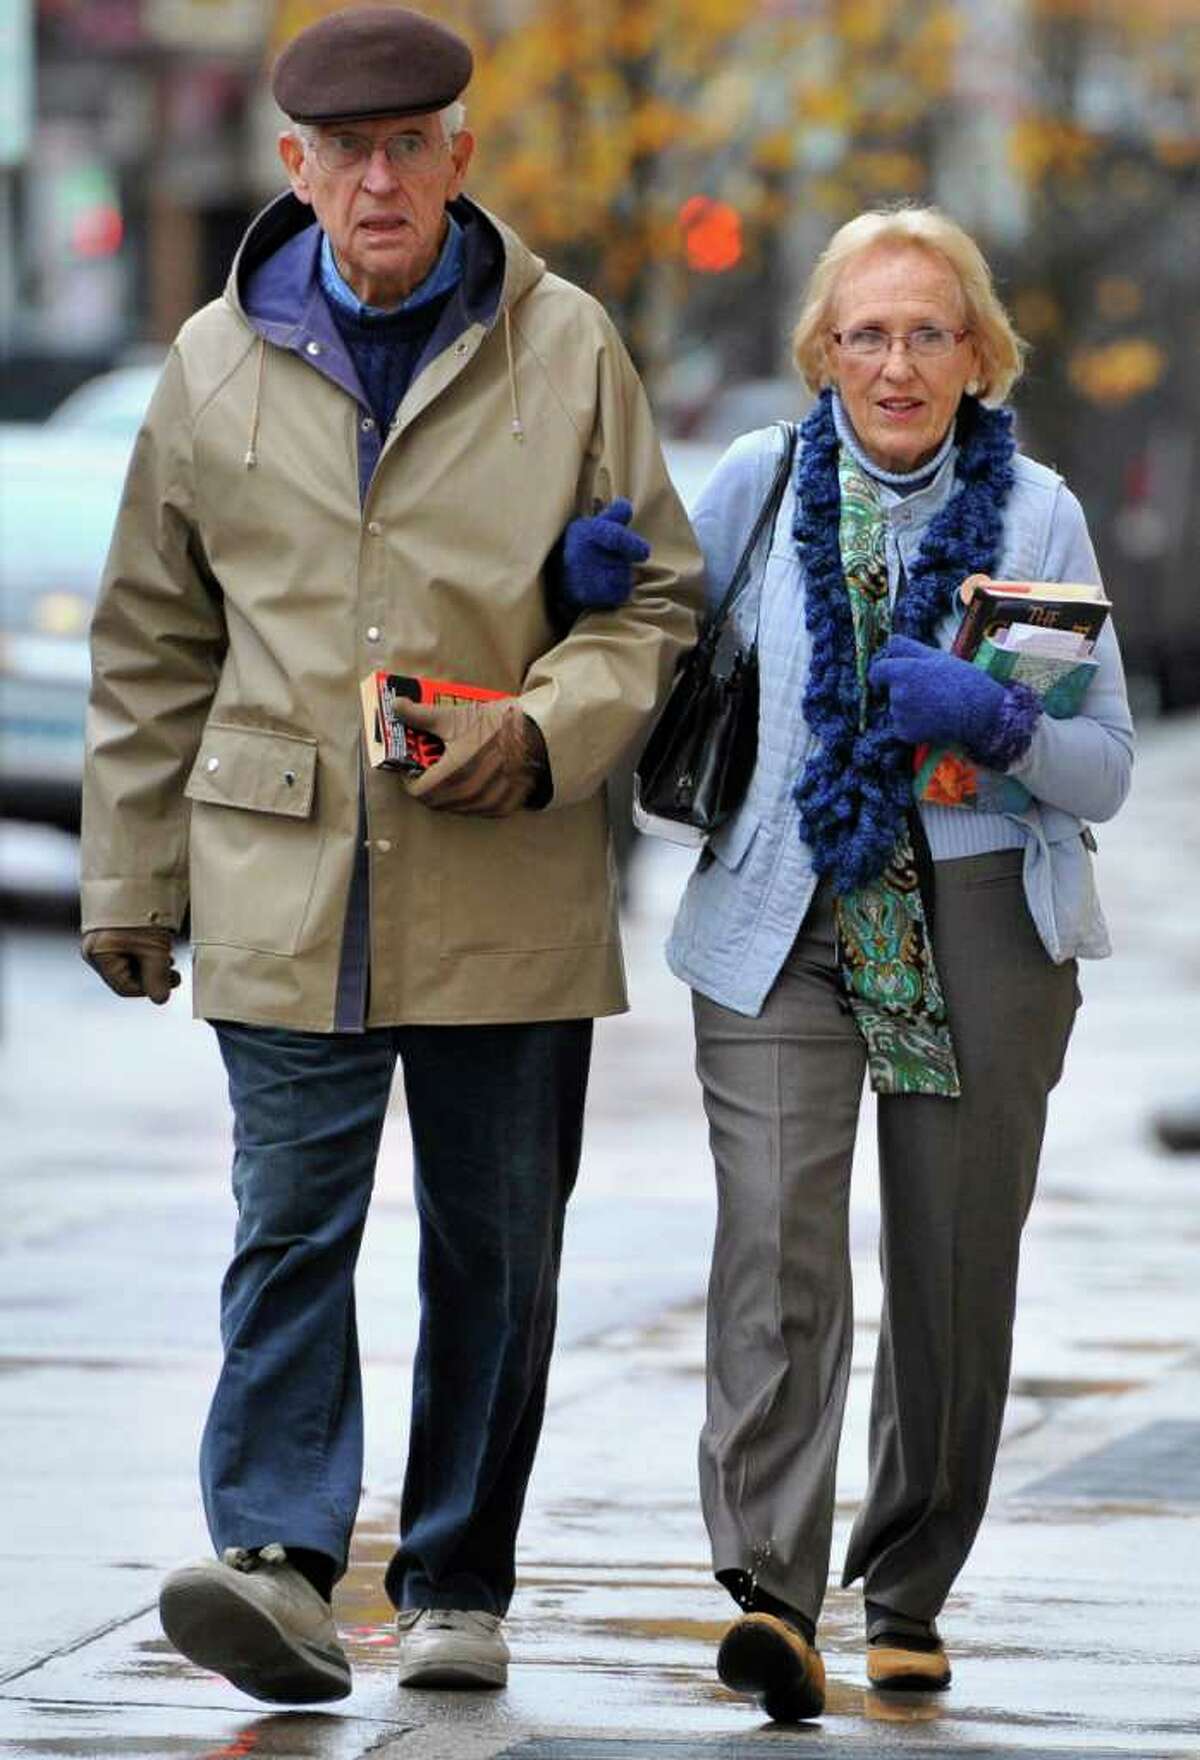 Richard and Marybelle Hawke, the parents of Jennifer Hawke-Petit, arrive at Superior Court in New Haven for the second day of jury deliberations in the penalty phase of the trial of Joshua Komisarjevsky in New Haven, Conn., Tuesday, Dec. 6, 2011. Komisarjevsky is charged with killing of Jennifer Hawke-Petit and daughters, Hayley and Michaela in a 2007 home invasion. (AP Photo/Jessica Hill)